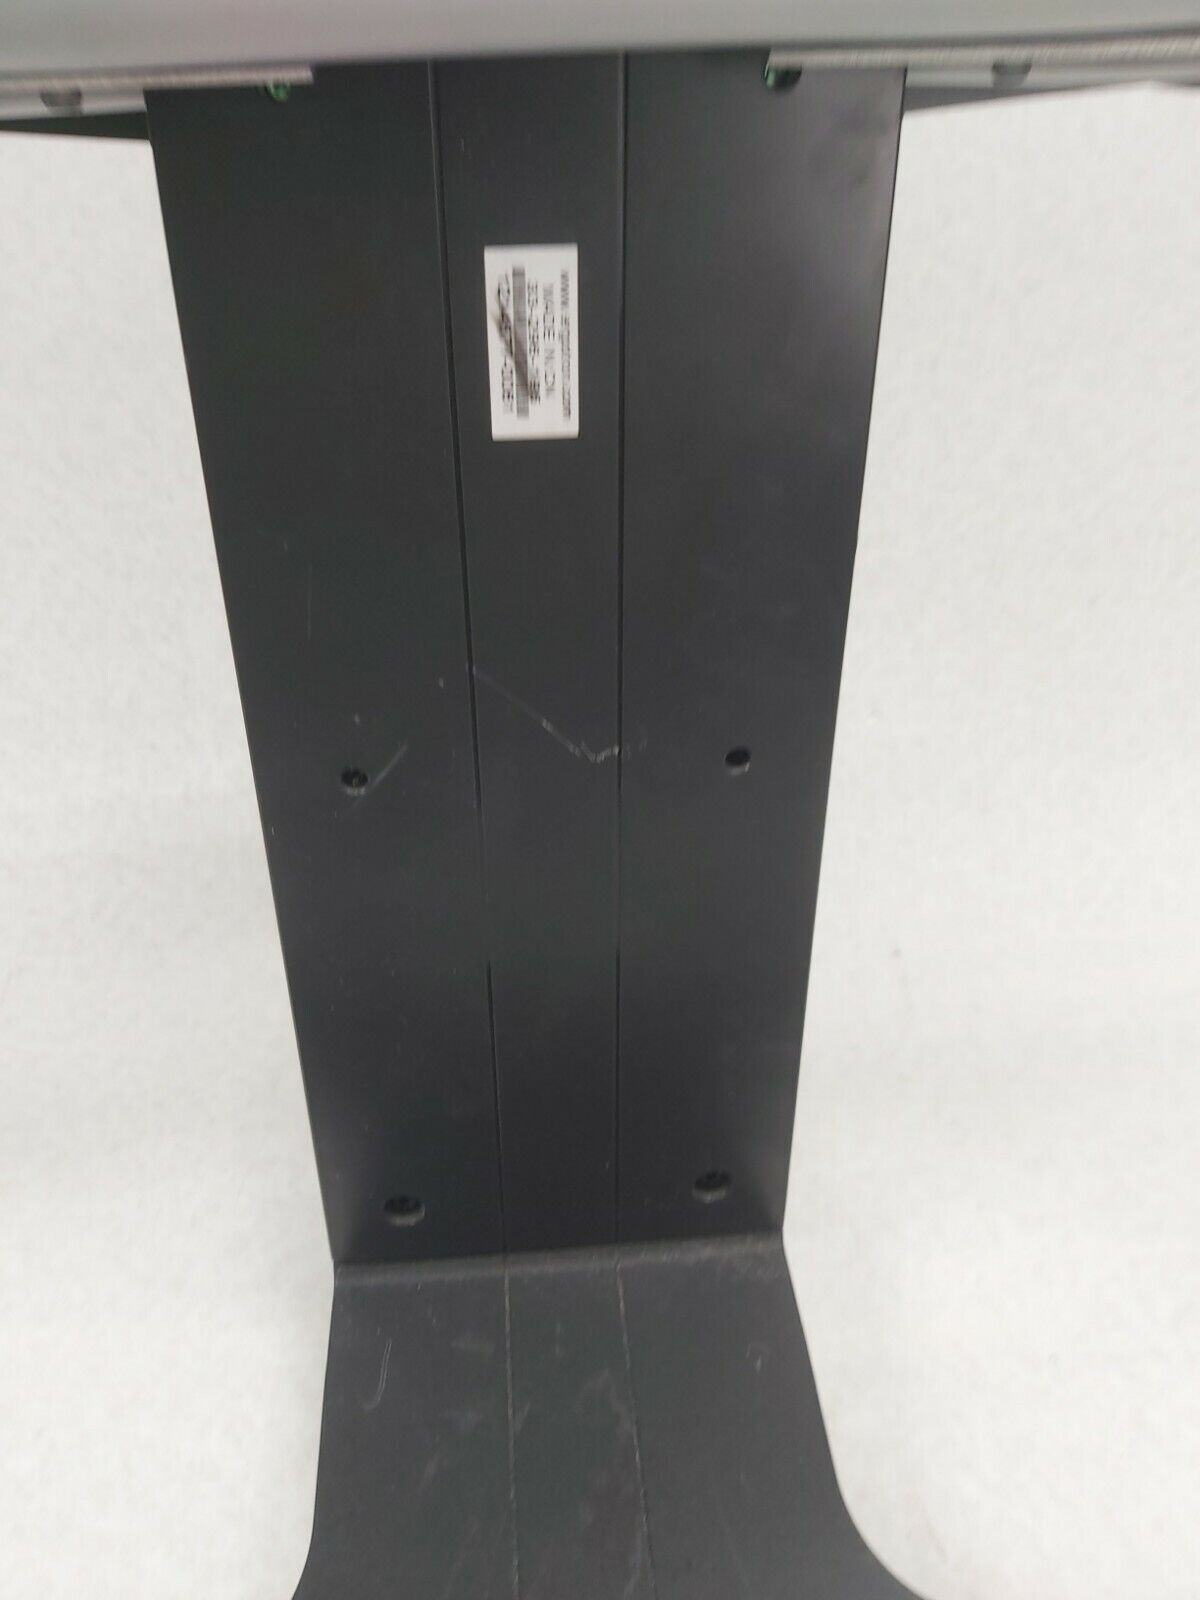 Ergotron 33-296-195 Display Stand for Monitors